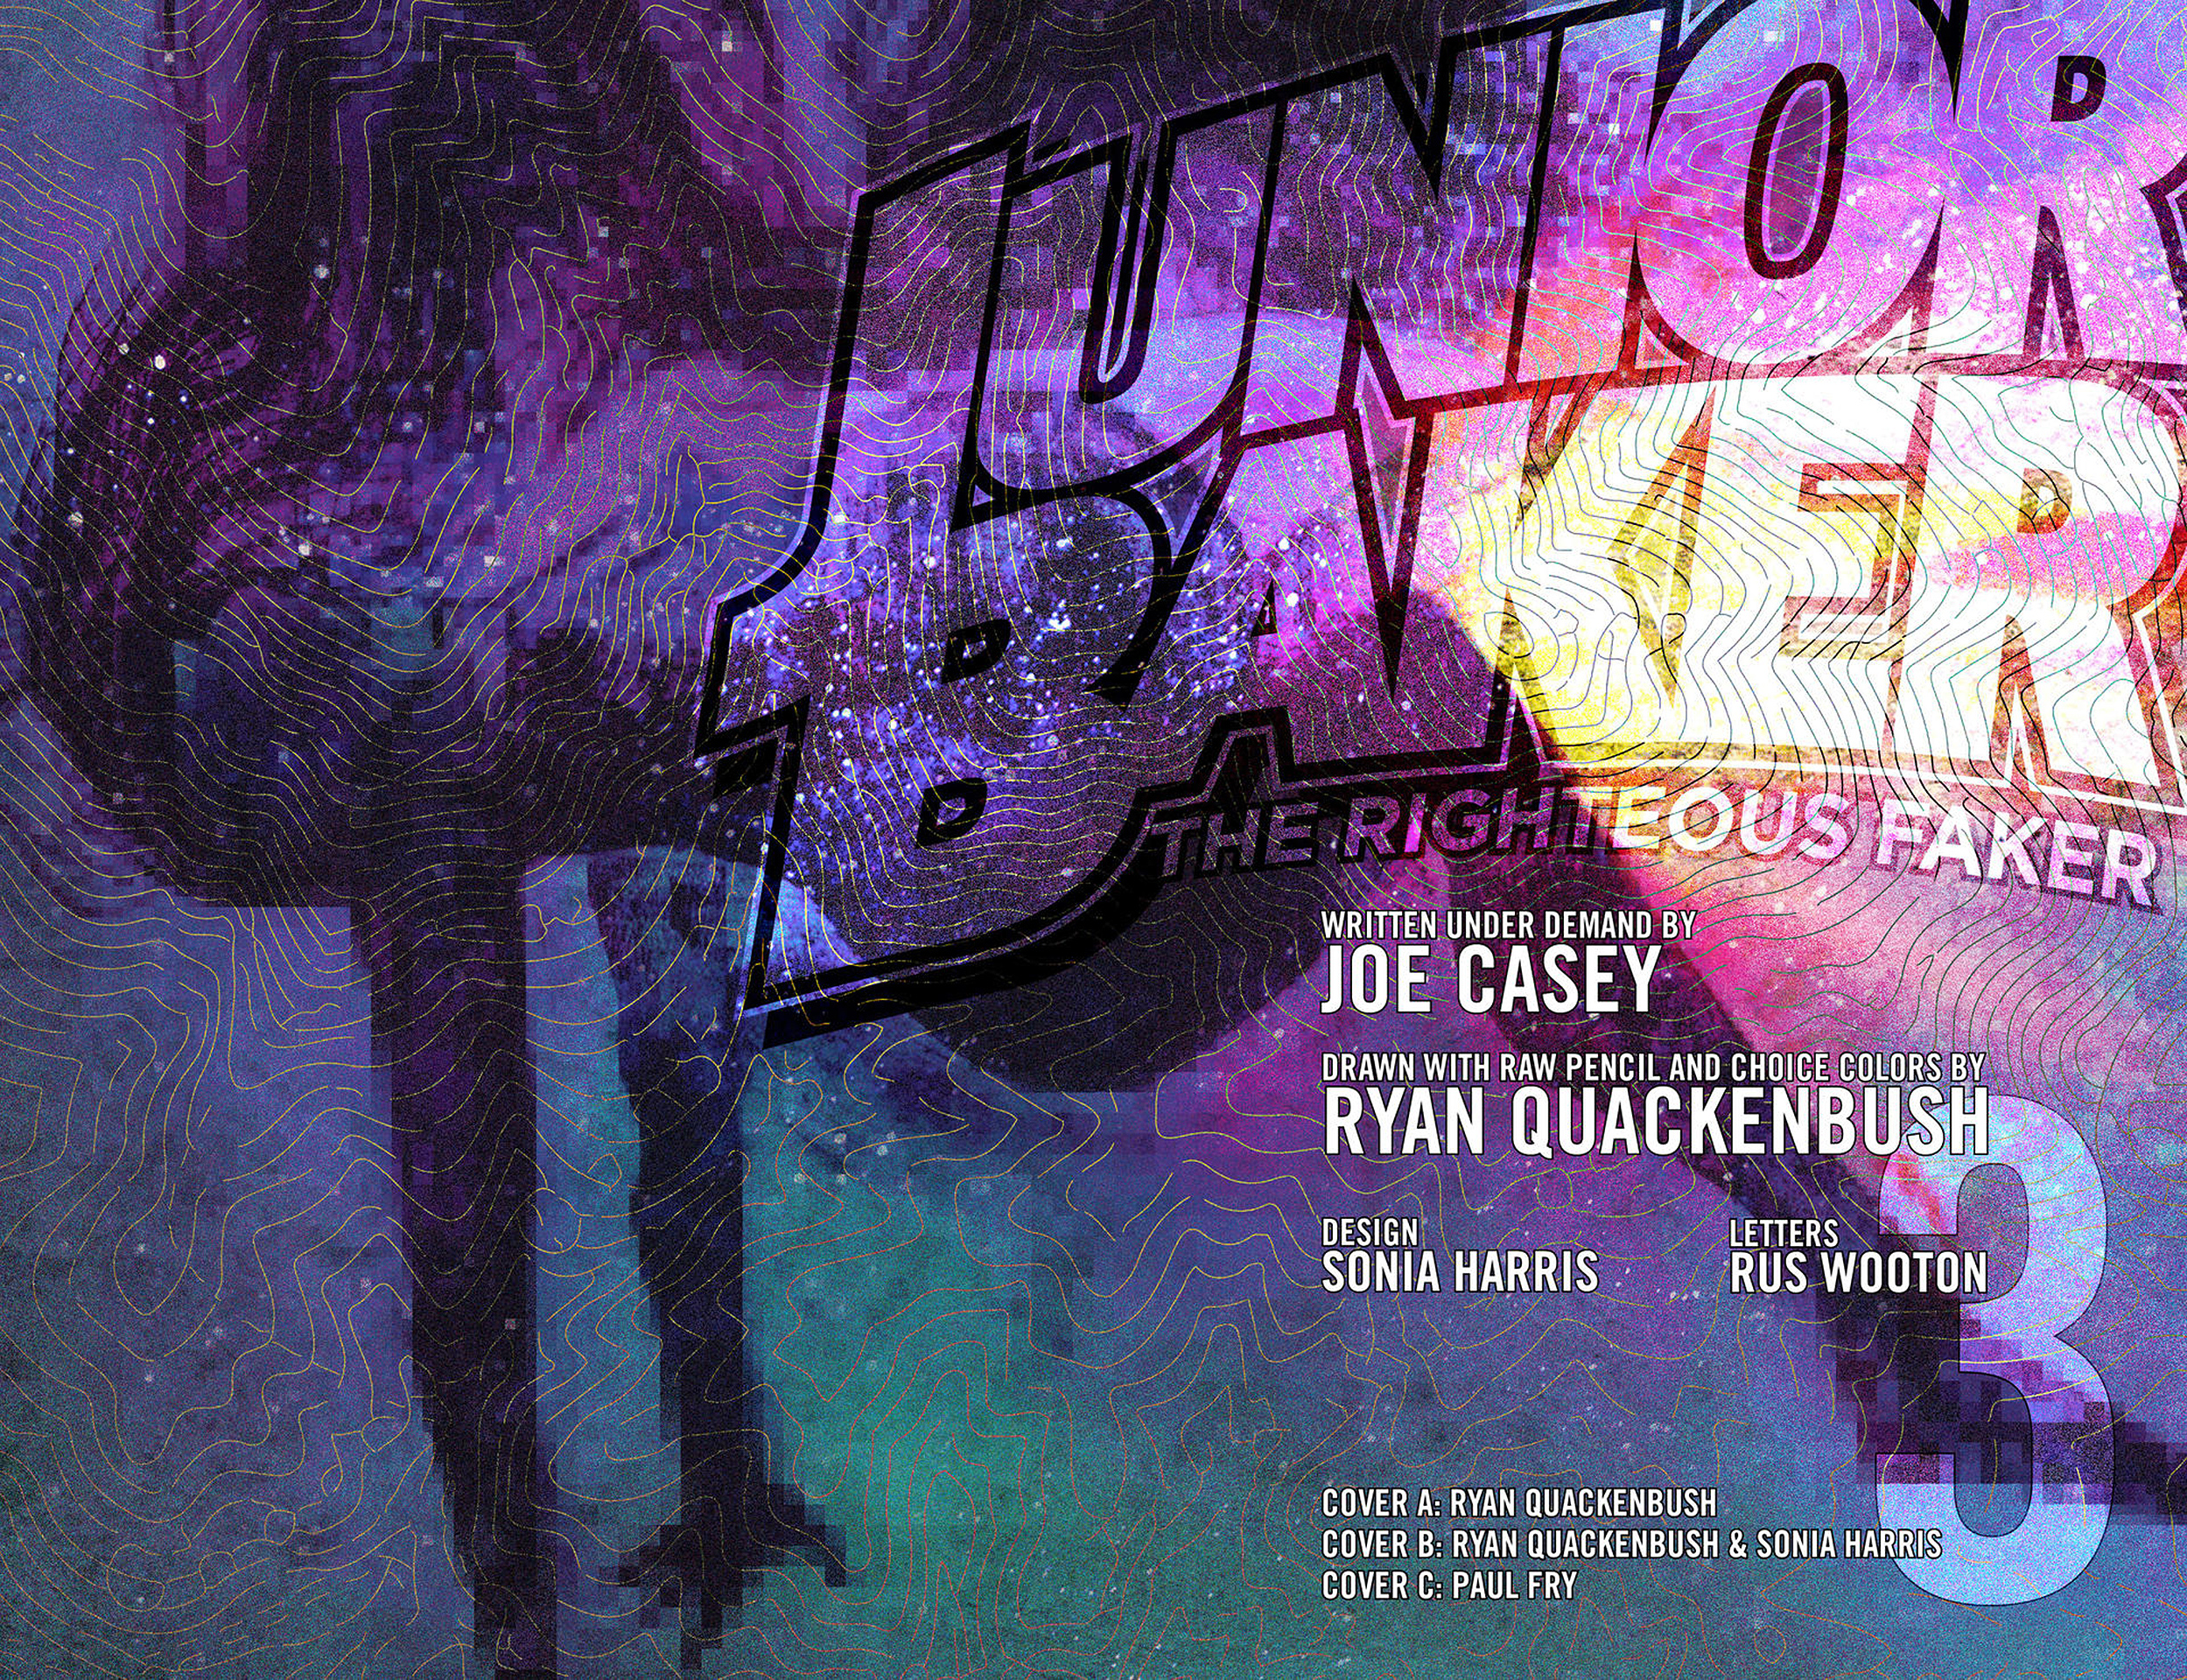 Read online Junior Baker the Righteous Faker comic -  Issue #3 - 2